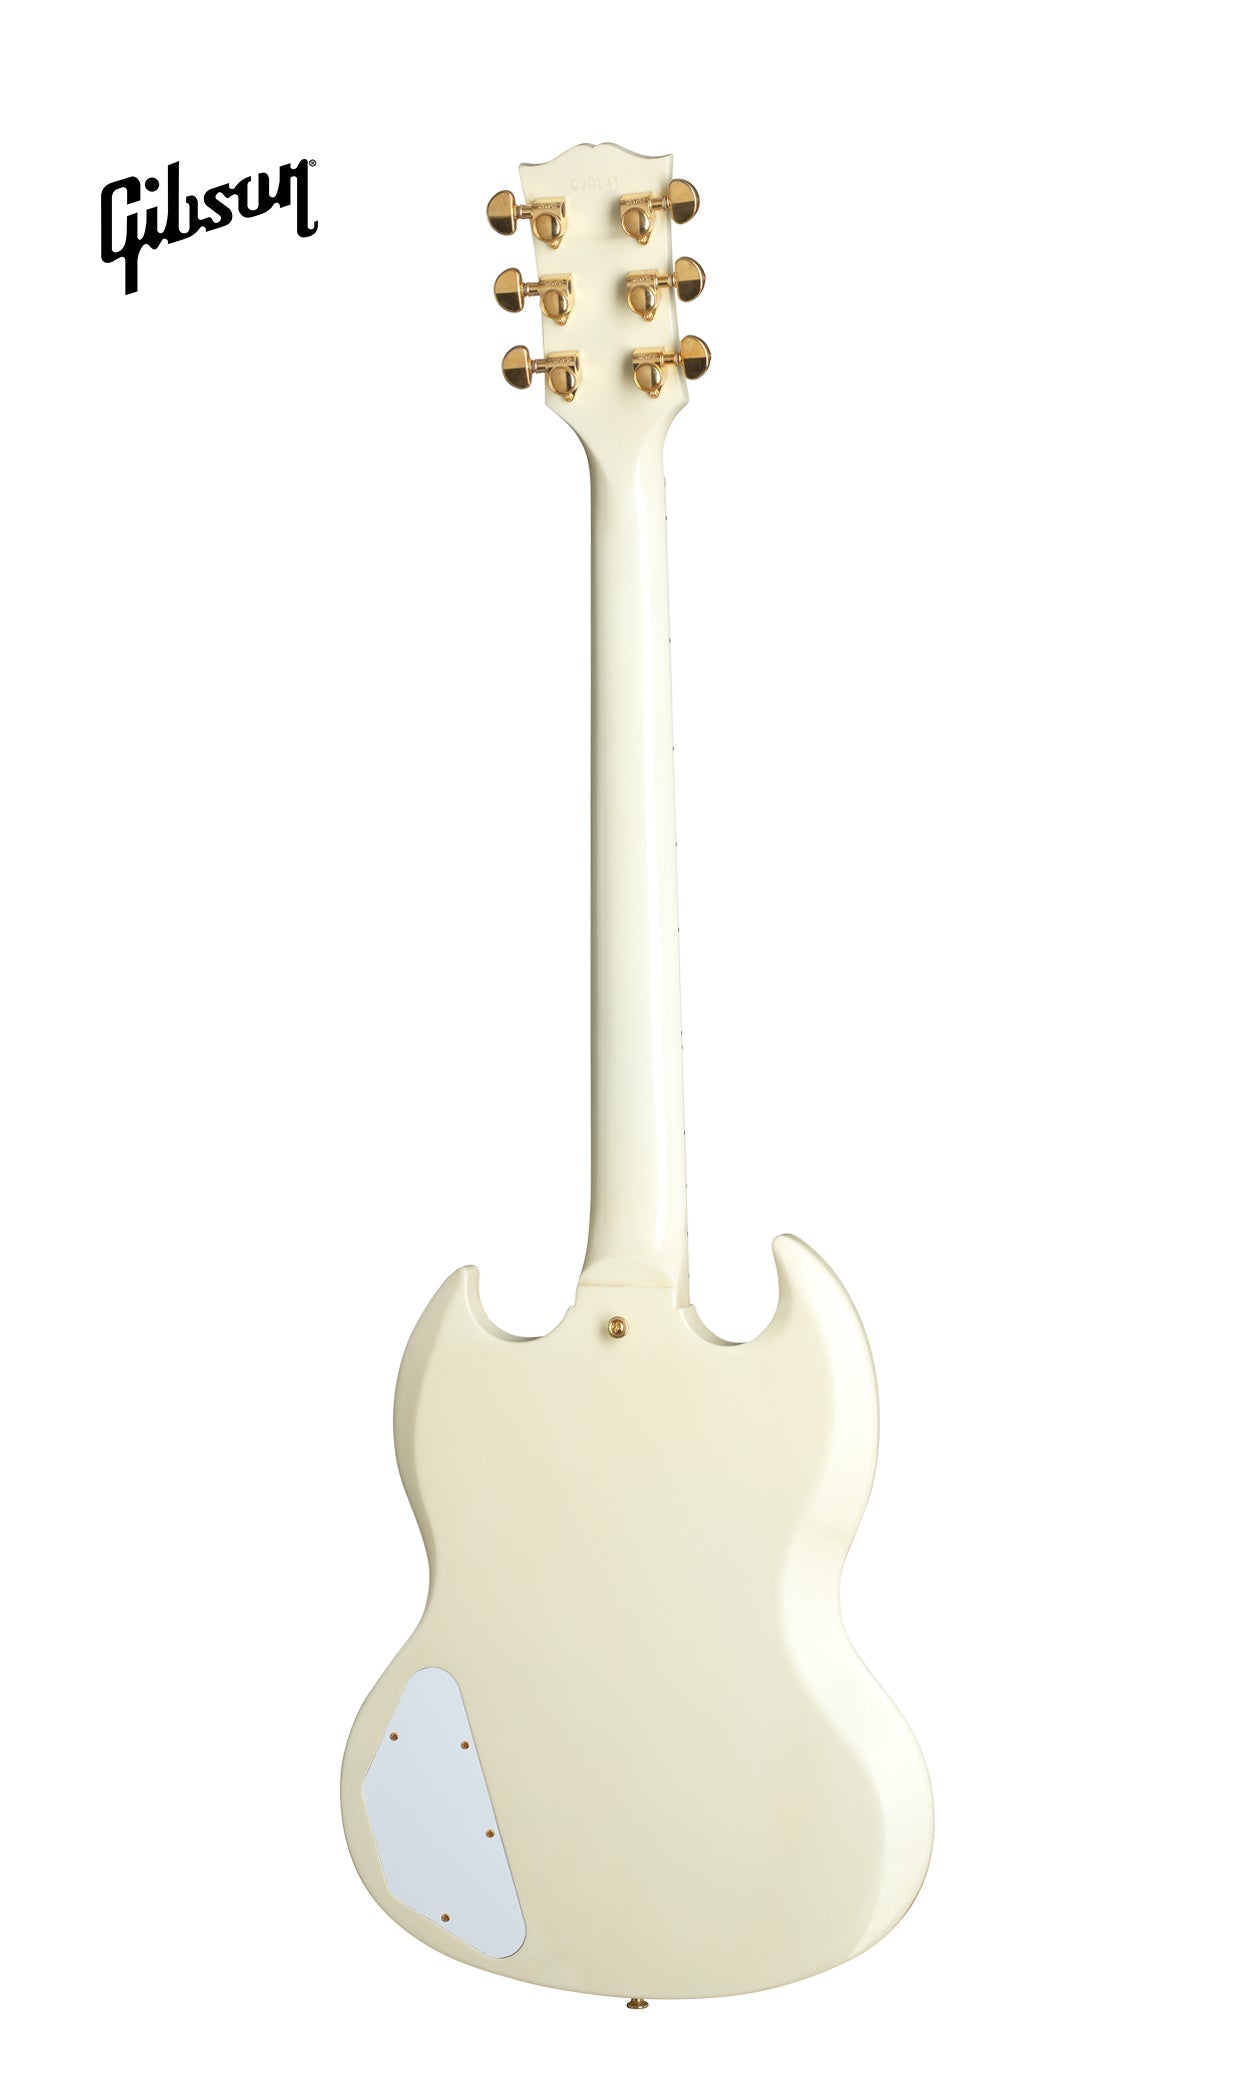 GIBSON 1963 LES PAUL SG CUSTOM REISSUE 3-PICKUP WITH MAESTRO VIBROLA VOS ELECTRIC GUITAR - CLASSIC WHITE